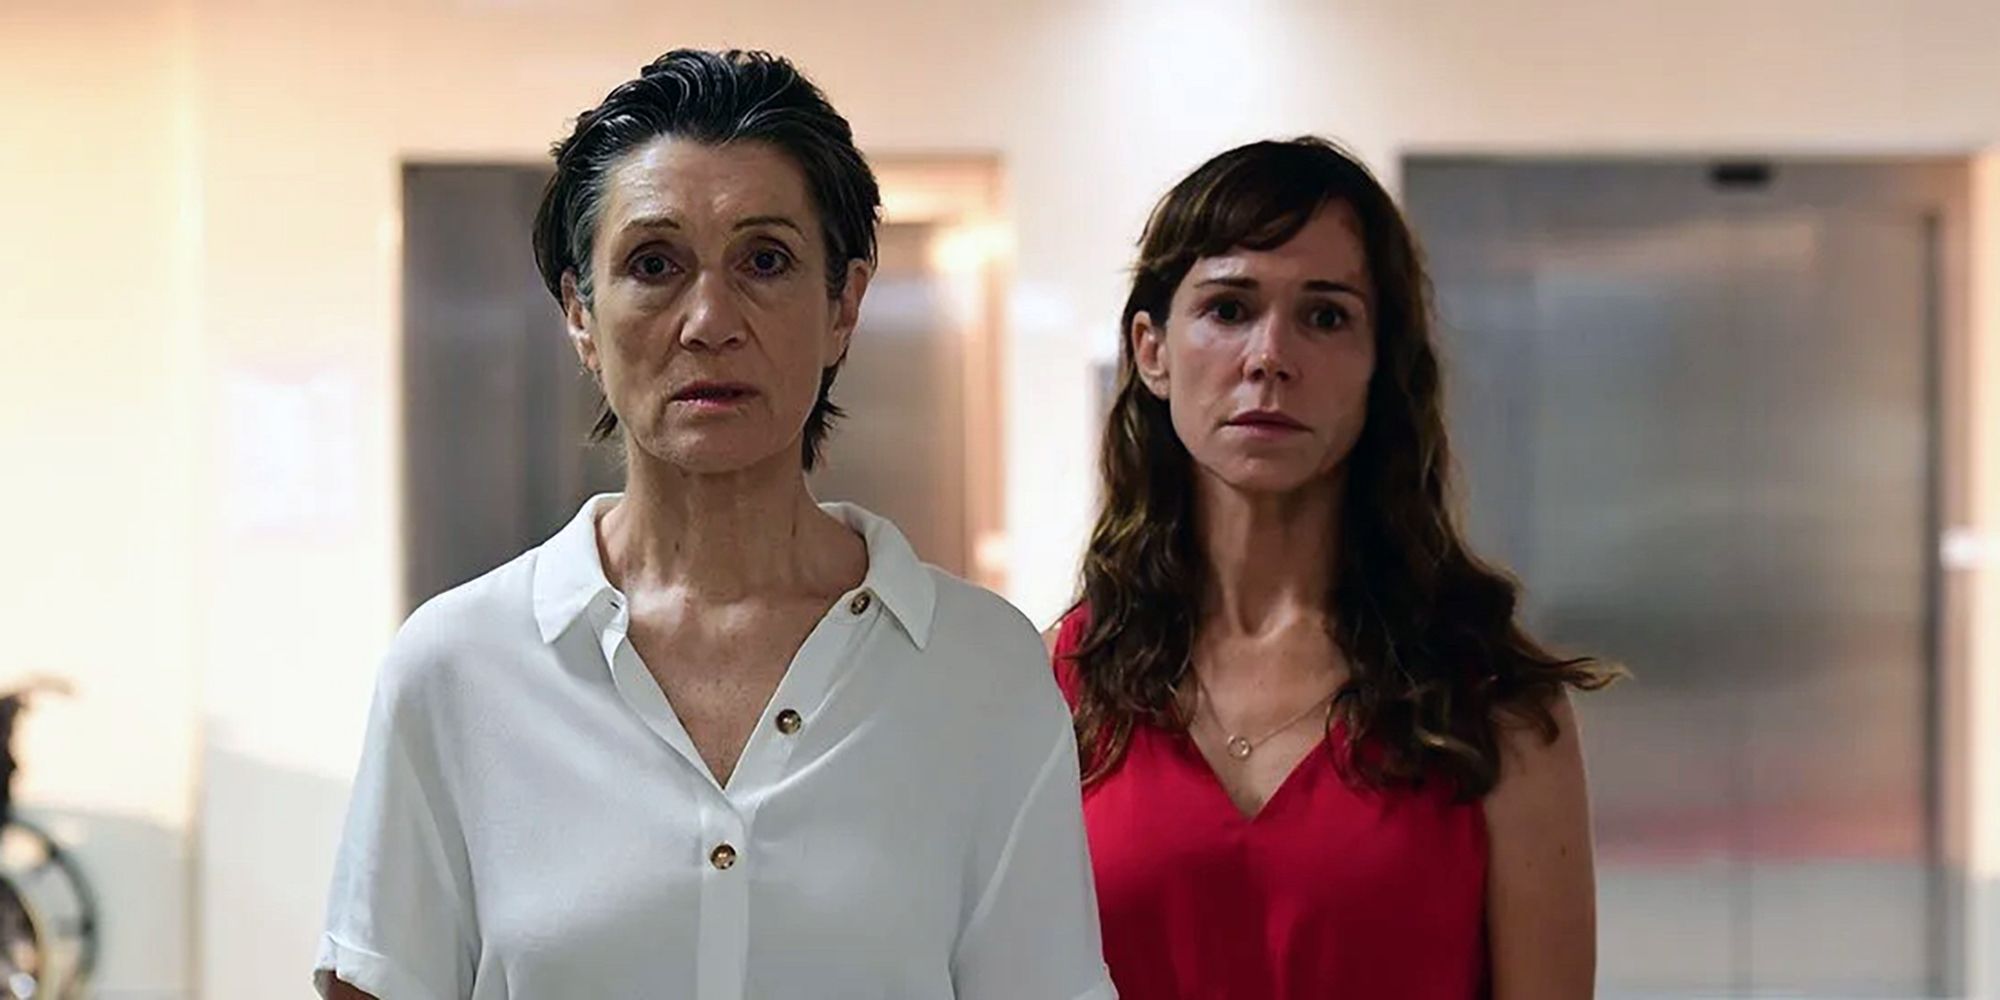 Harriet Walter (left) and Frances O'Connor (right) star in 'The End', a bleak comedy about life and death